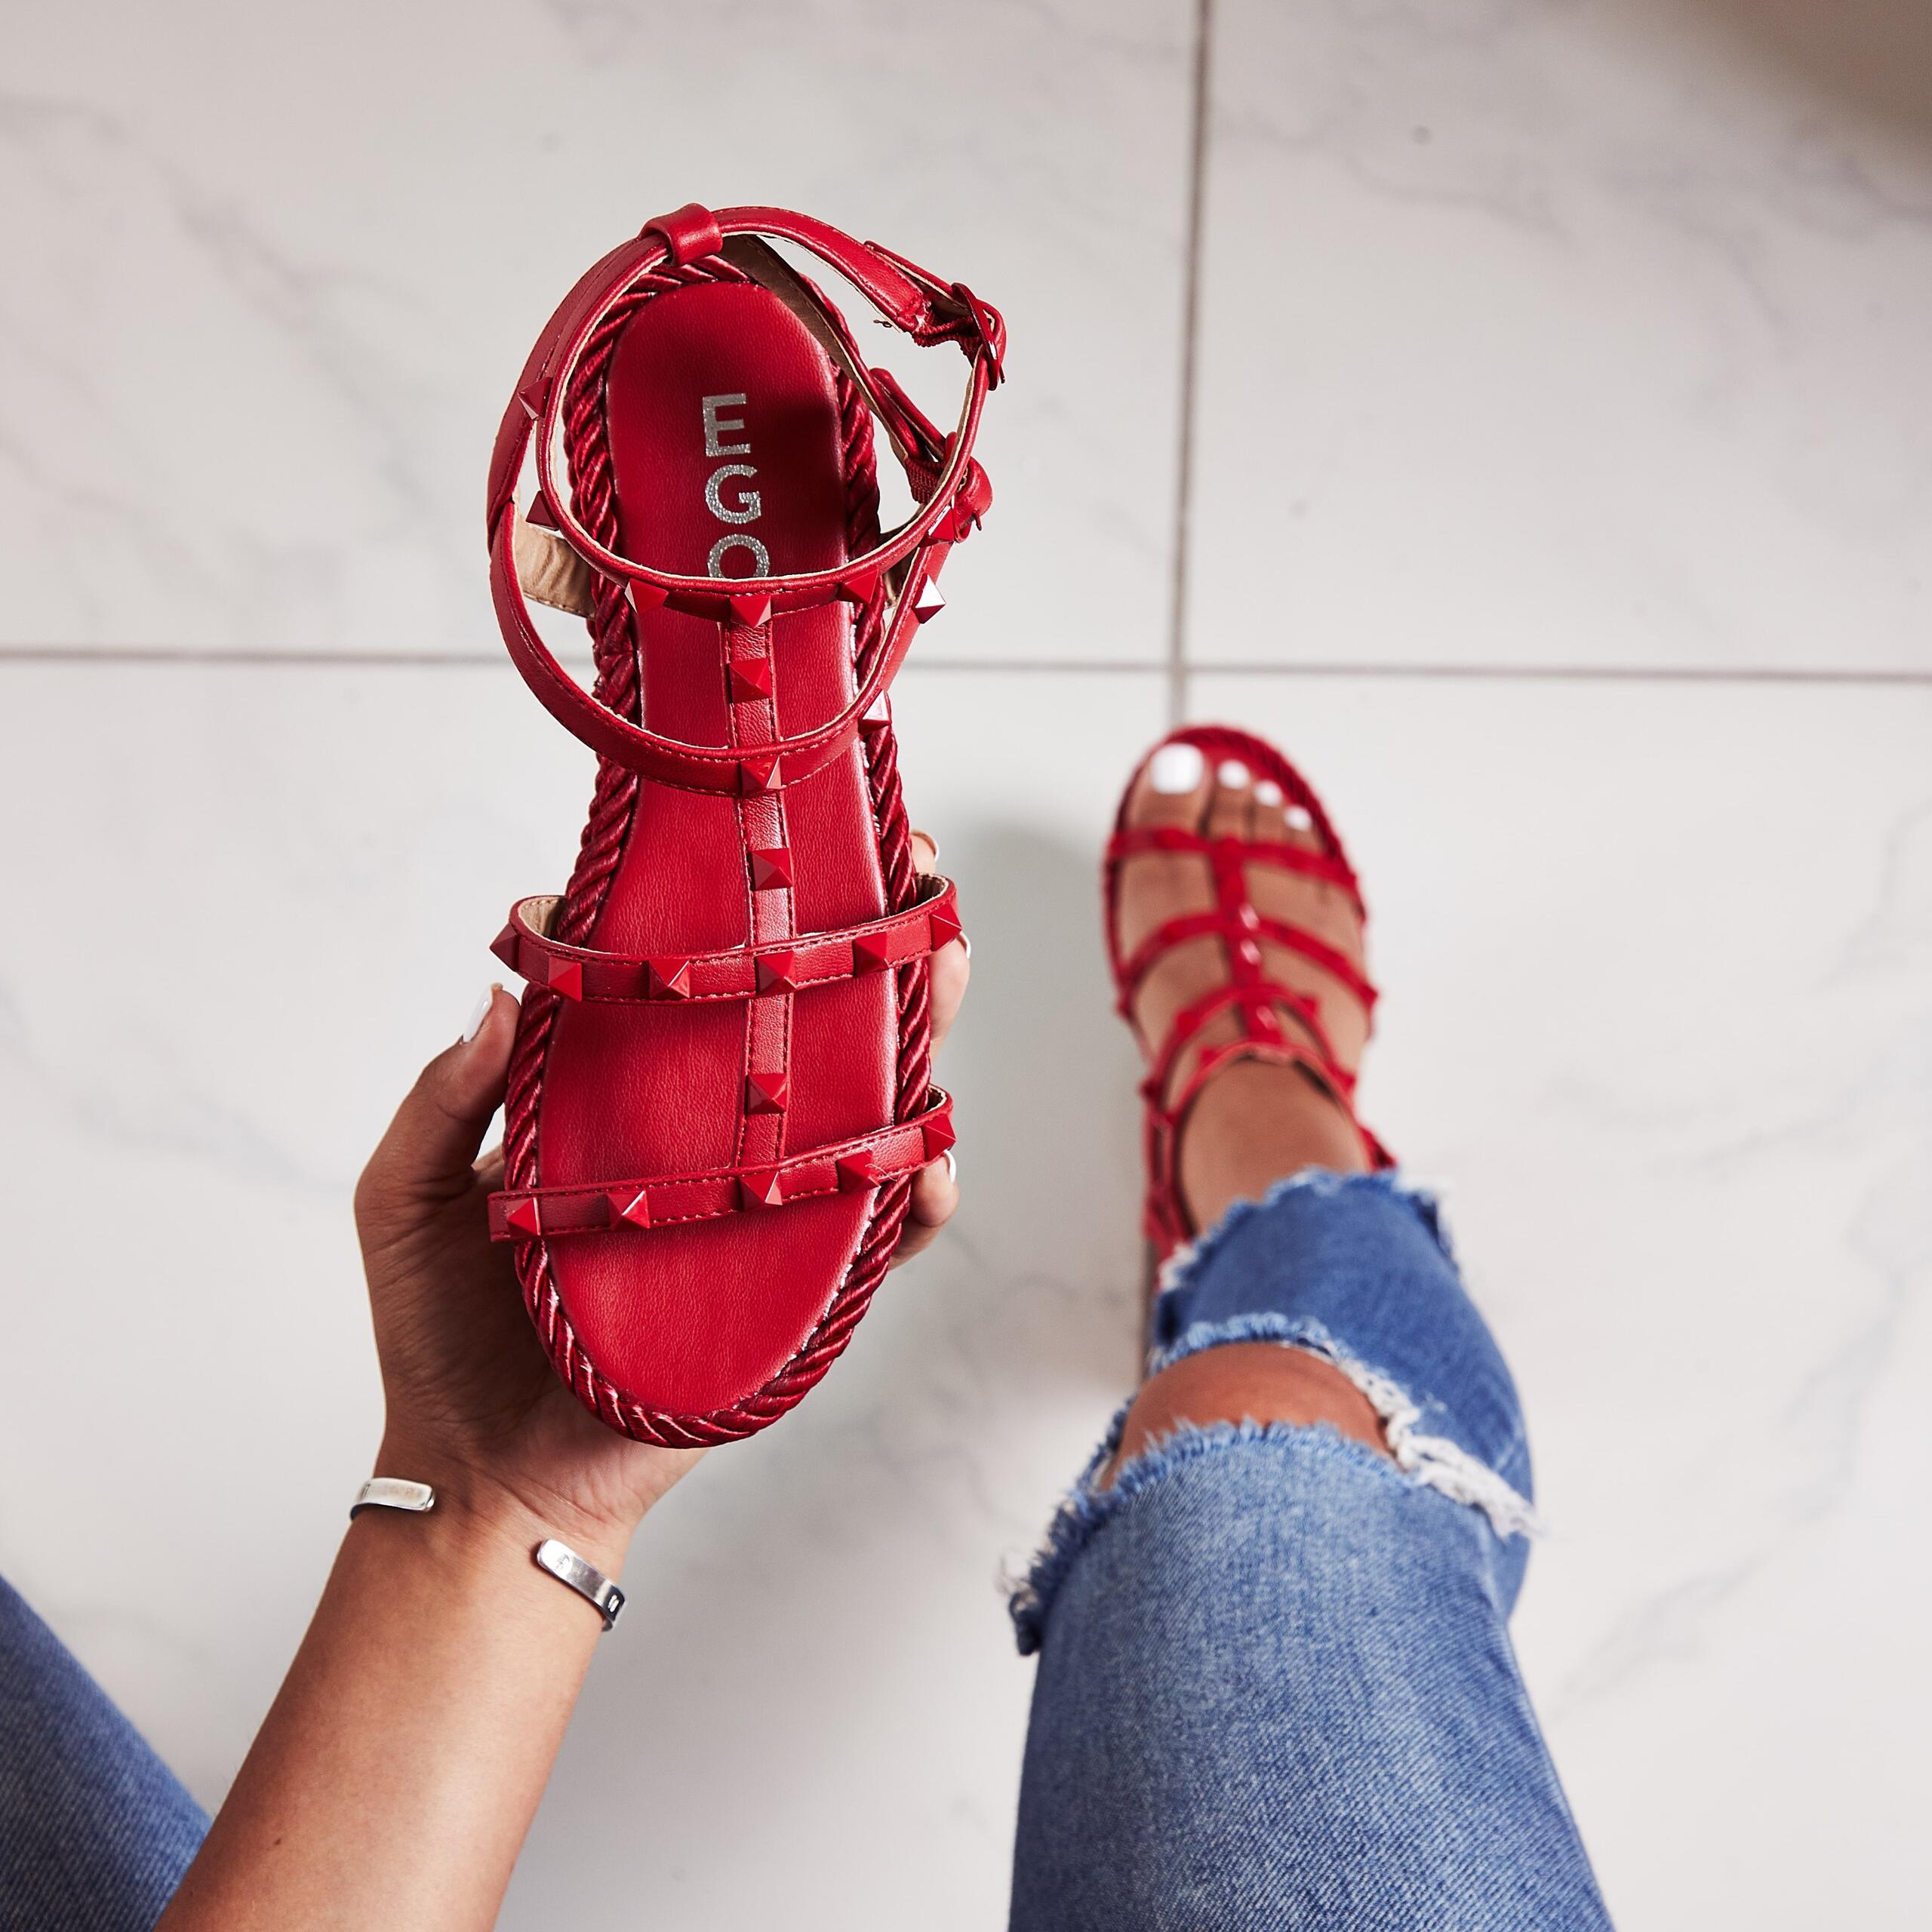 An image of a pair of red sandals, a great item to pack if you